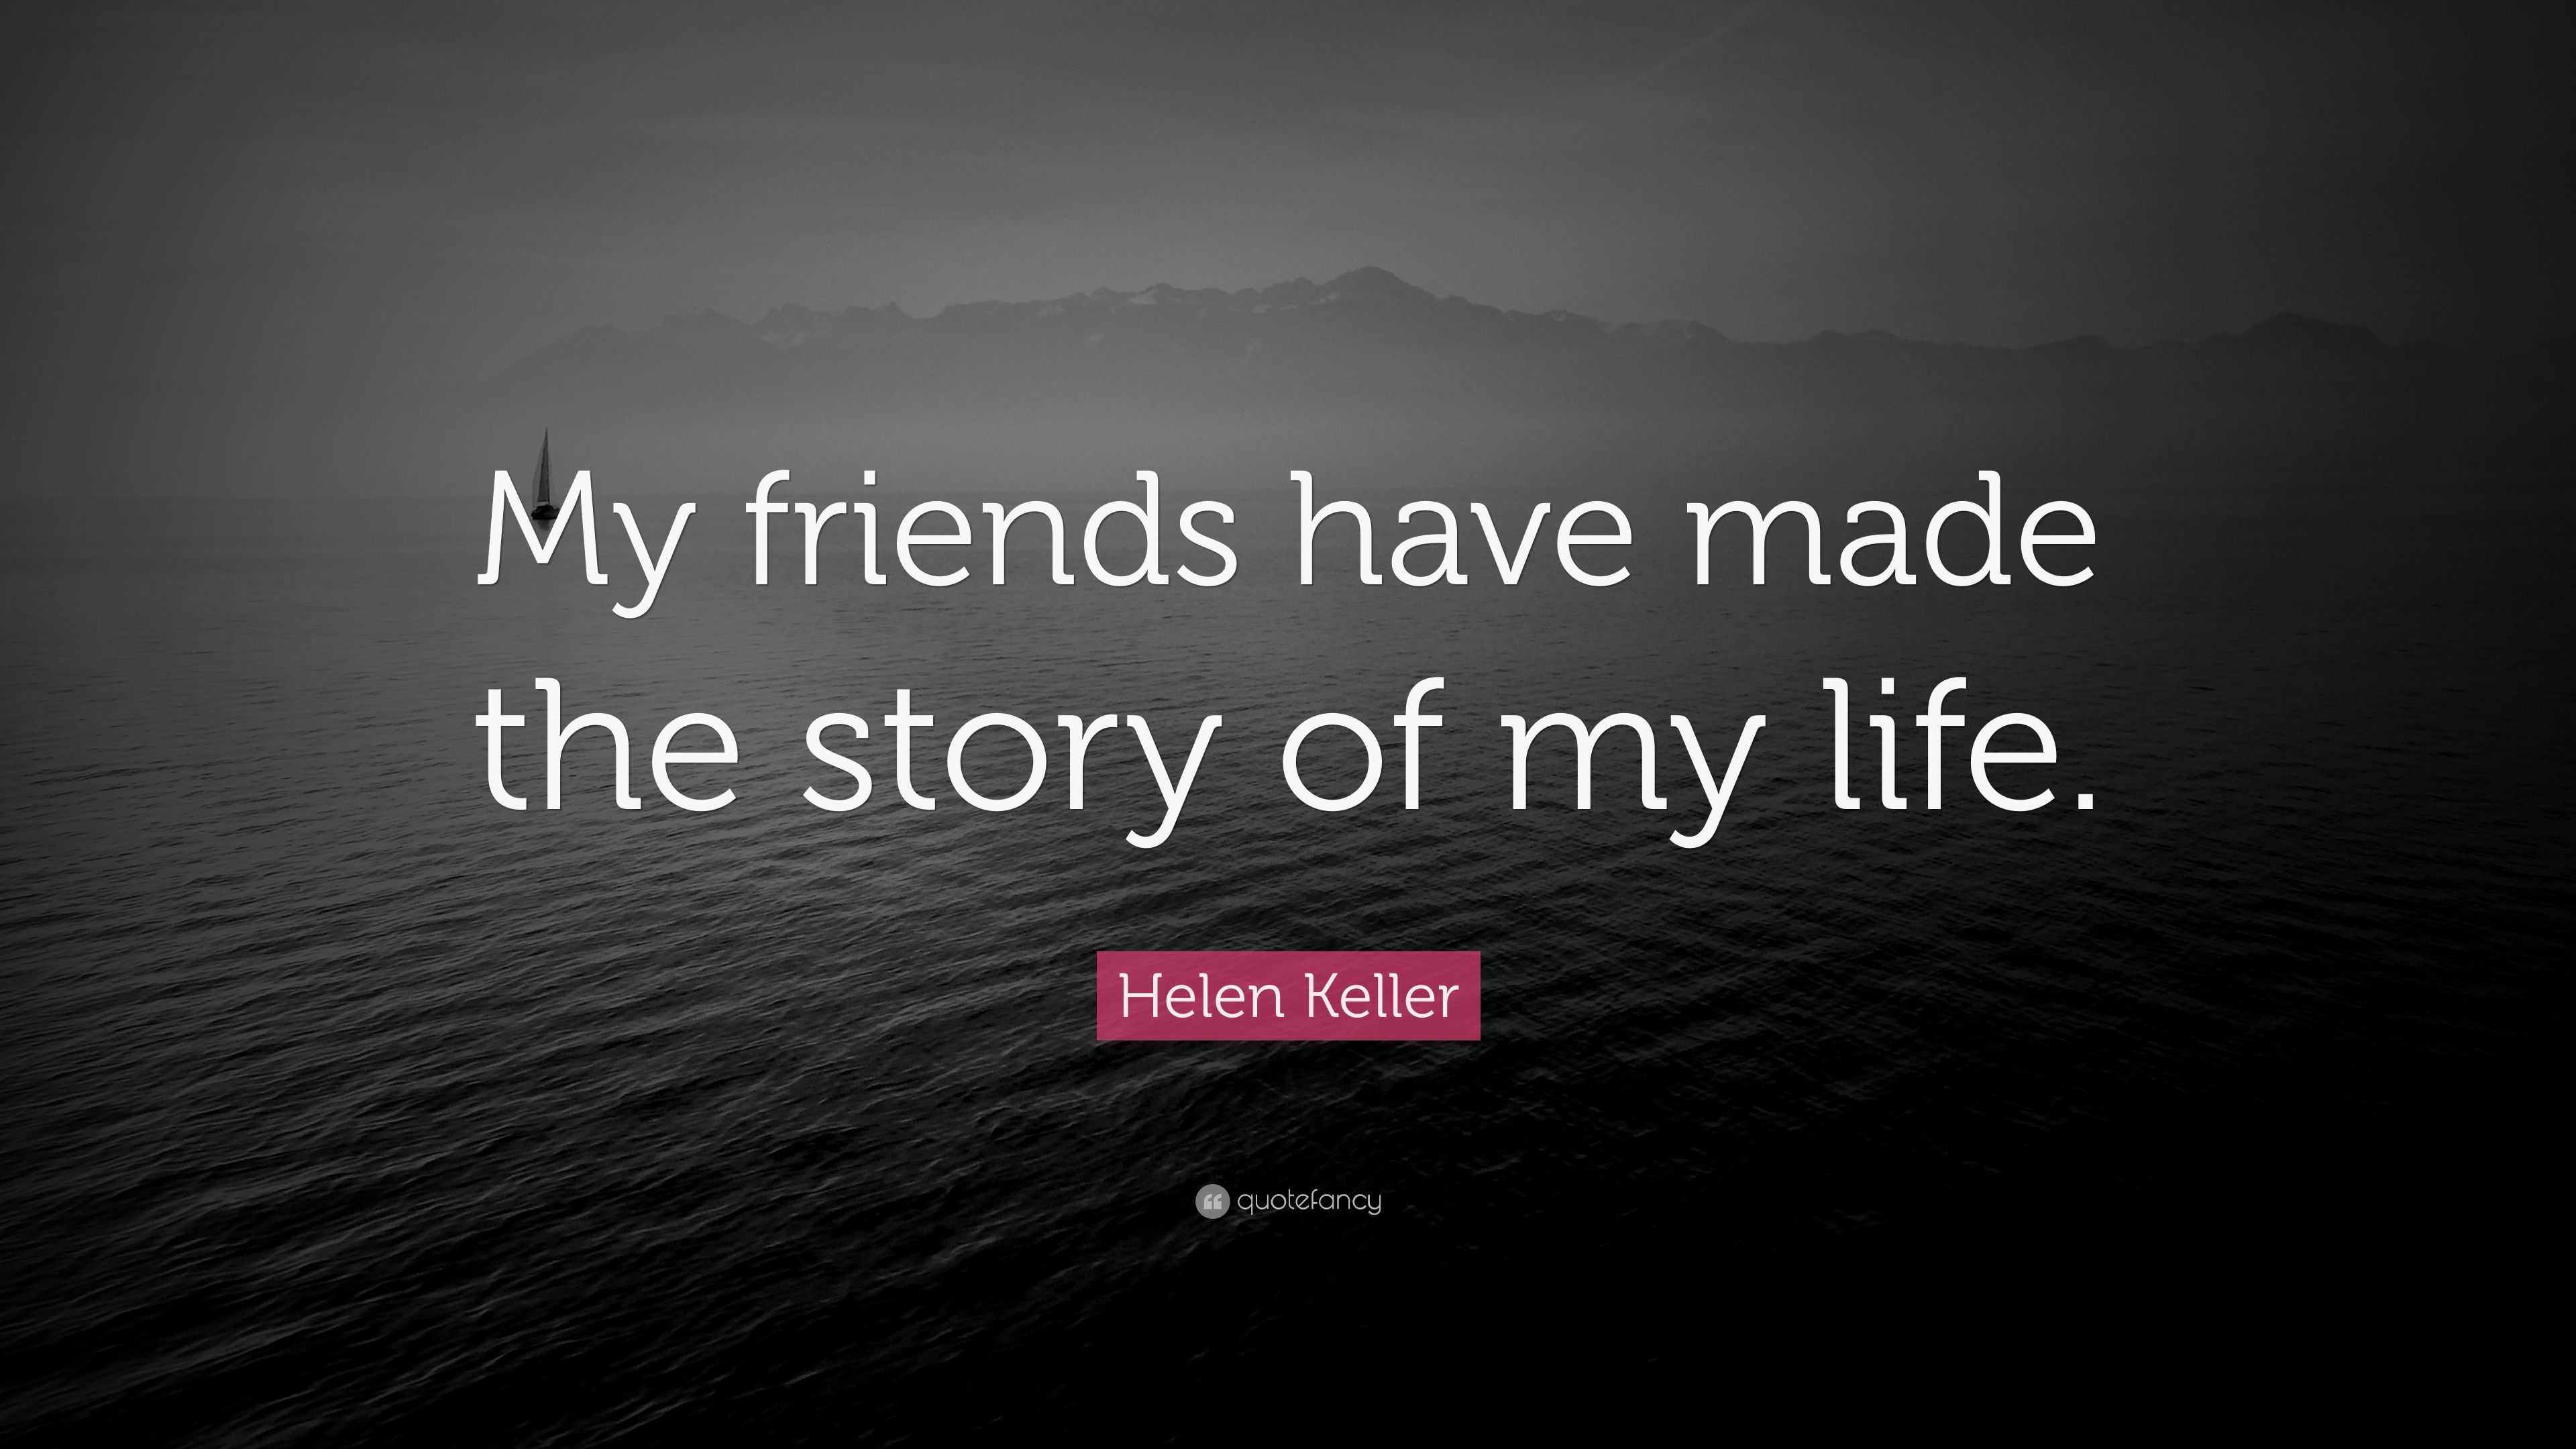 4688112 Helen Keller Quote My friends have made the story of my life